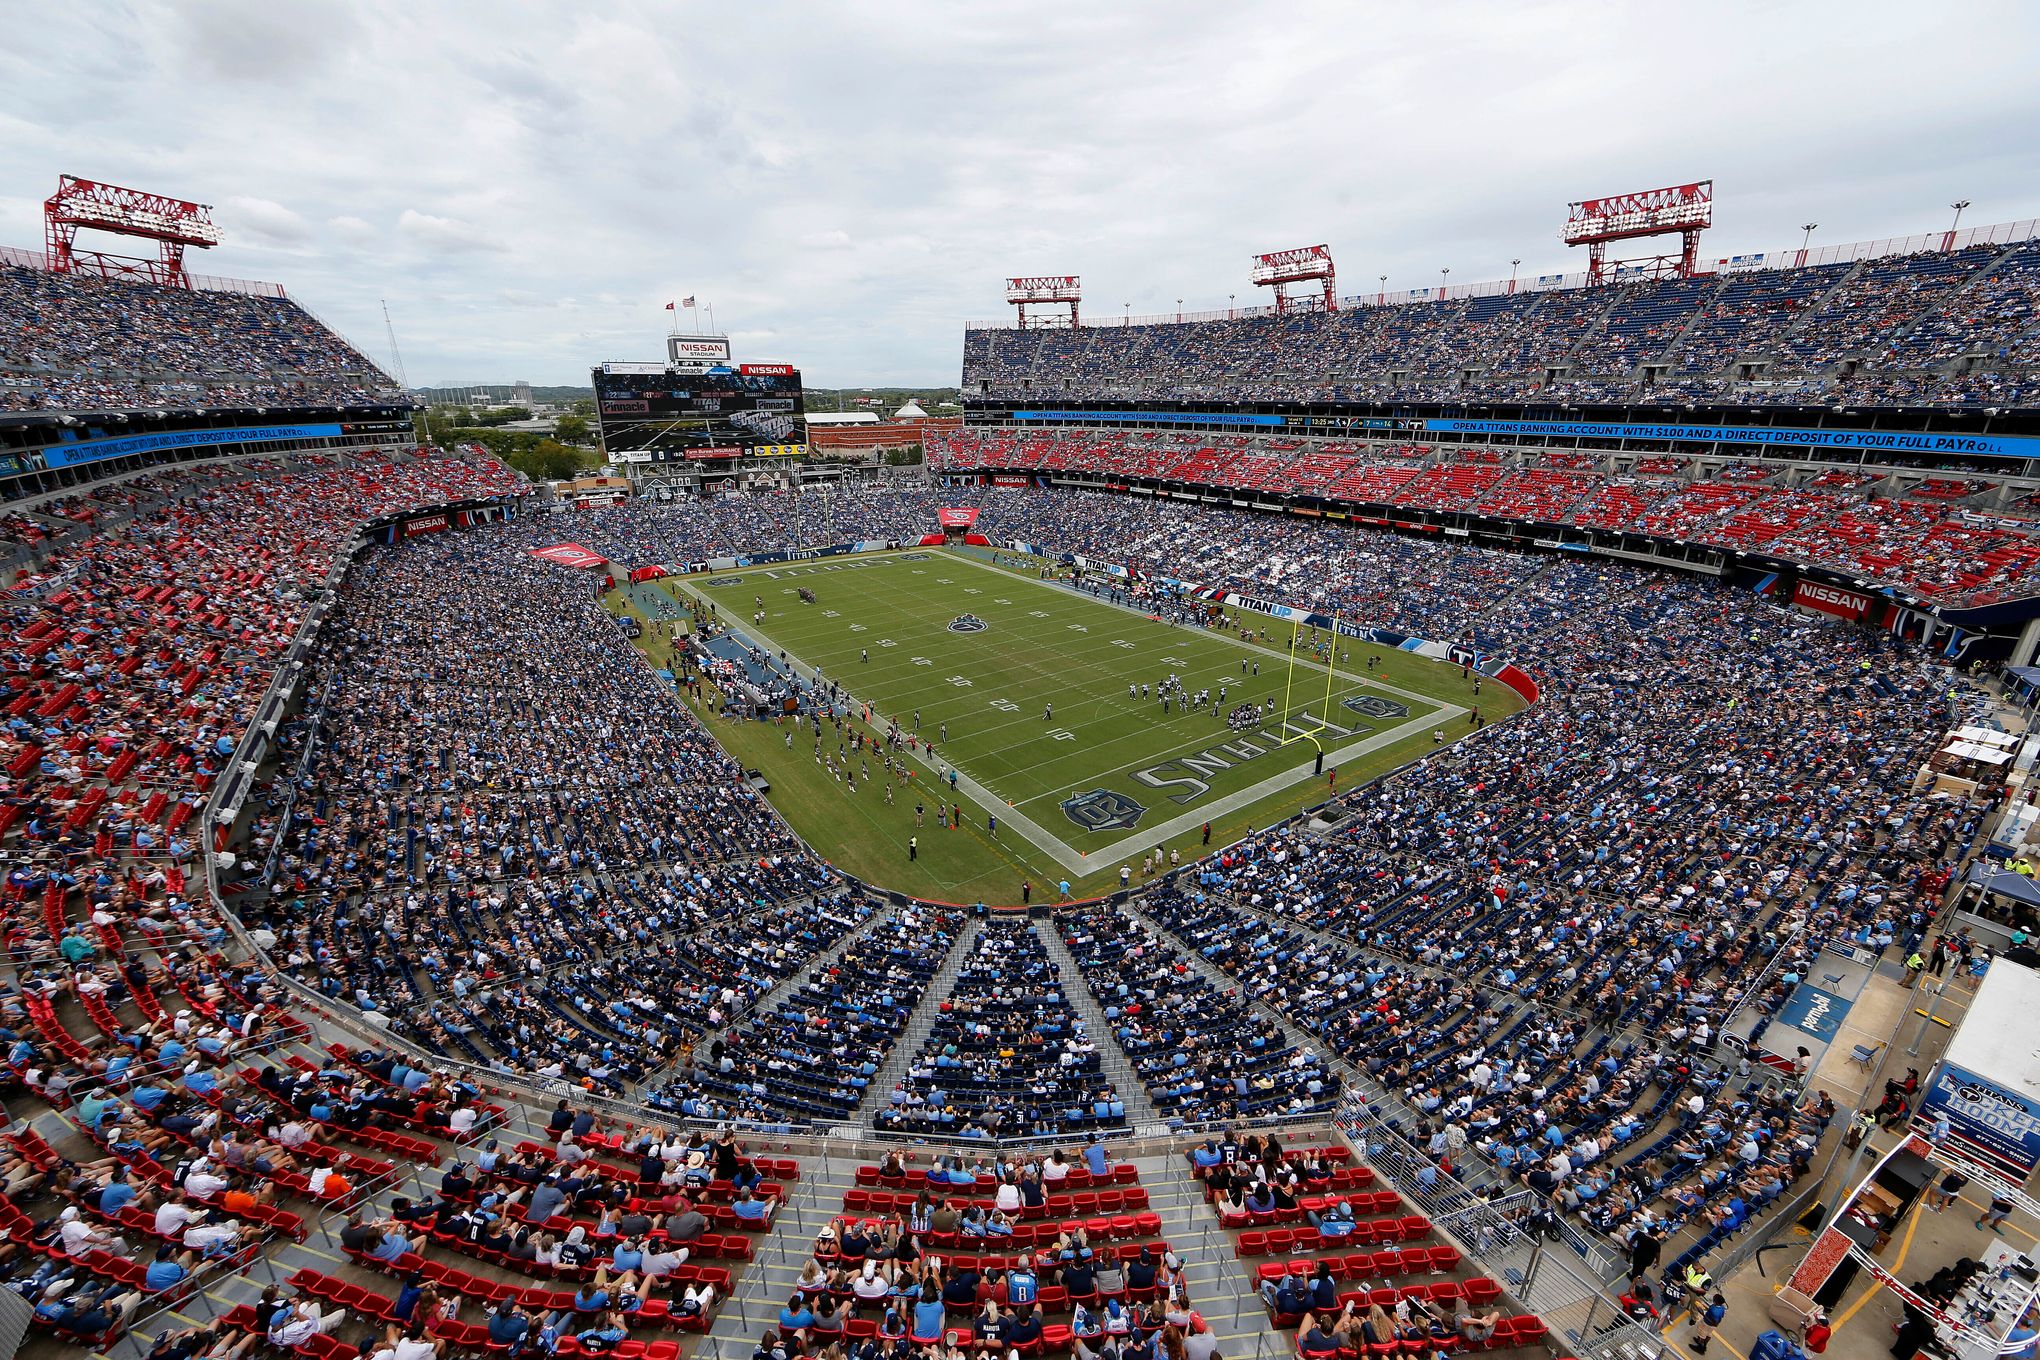 Should taxpayers fund Sun Life Stadium renovations for Super Bowl